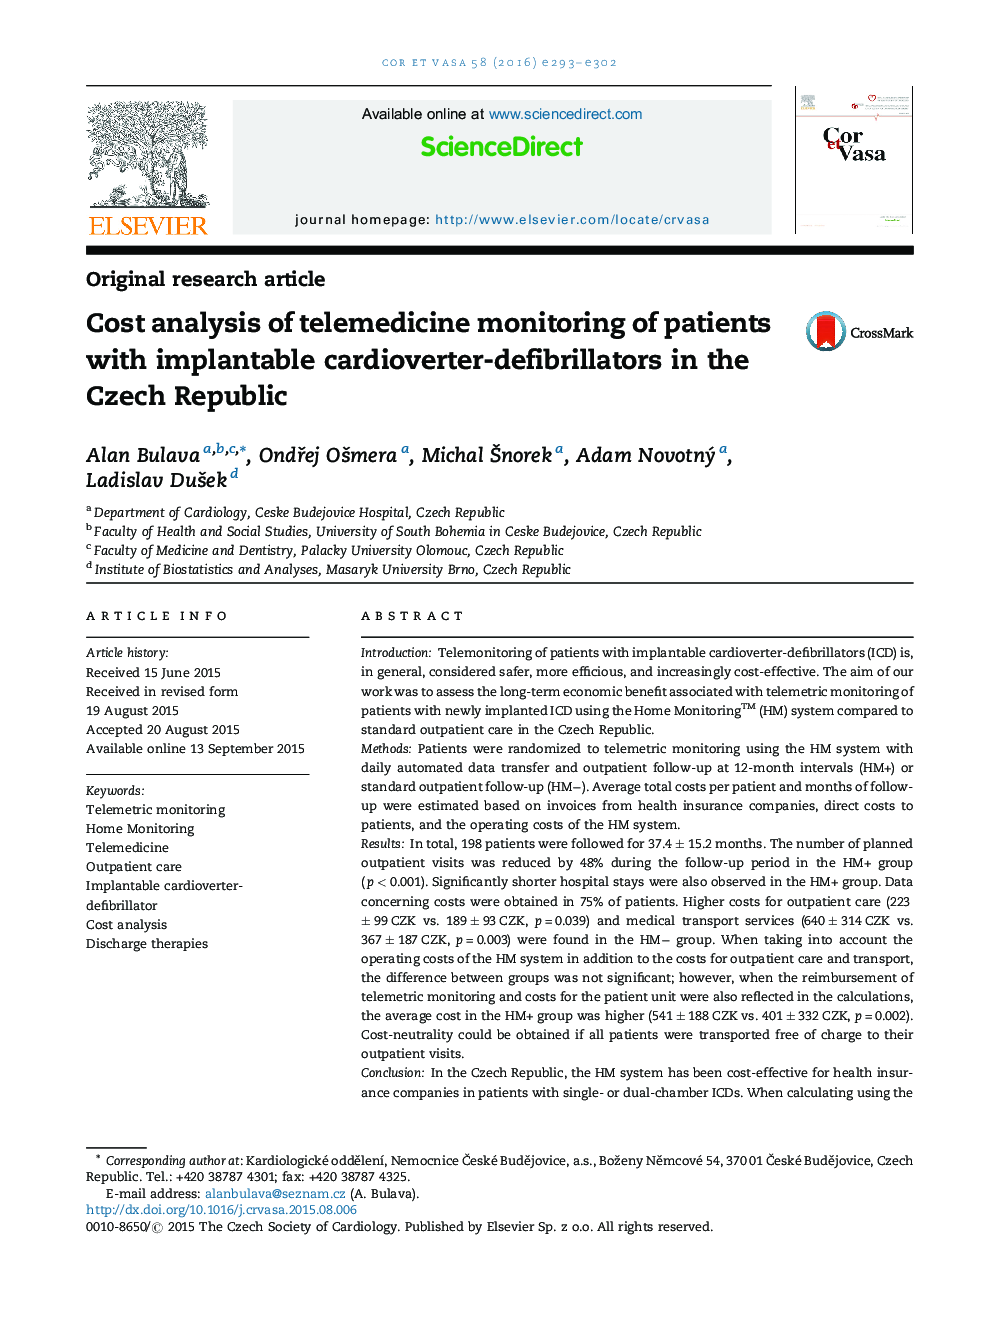 Cost analysis of telemedicine monitoring of patients with implantable cardioverter-defibrillators in the Czech Republic